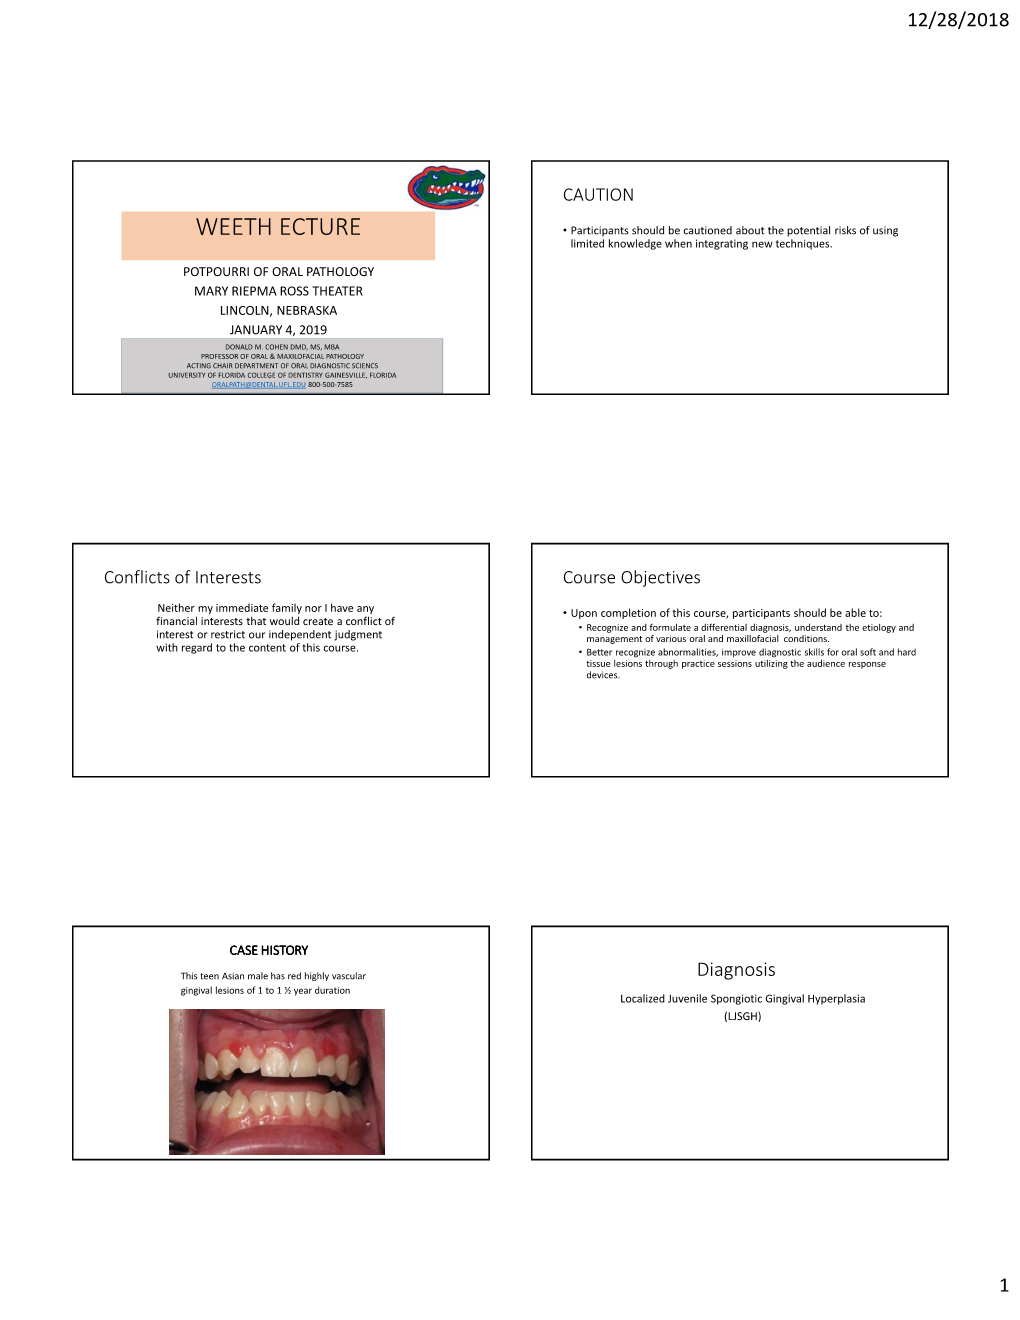 PDF Weeth Lecture POTPOURI of ORAL Pathology